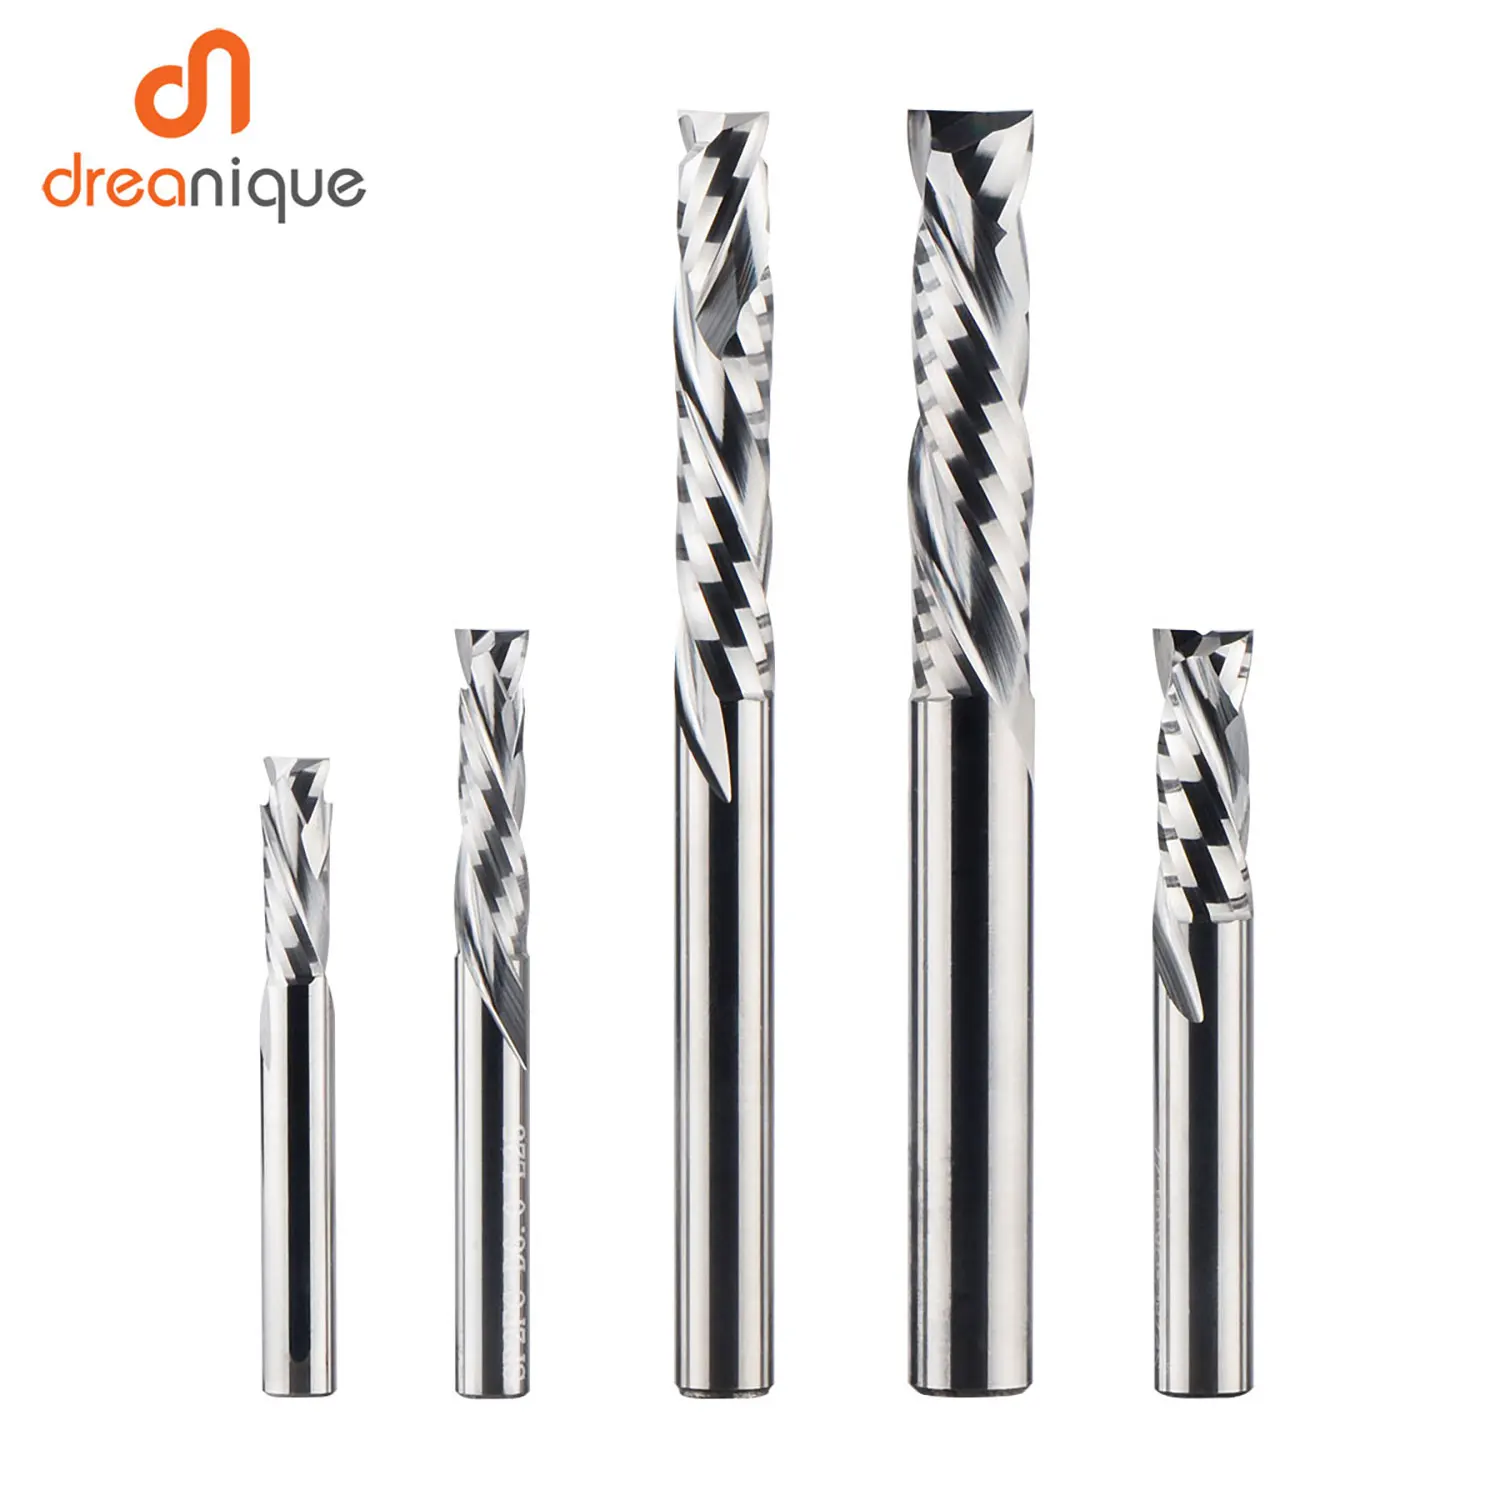 milling cutter woodwork UP & DOWN Cut 2 Flutes Spiral Carbide Milling Tool,  CNC Router, Compression Wood End Mill Cutter Bits